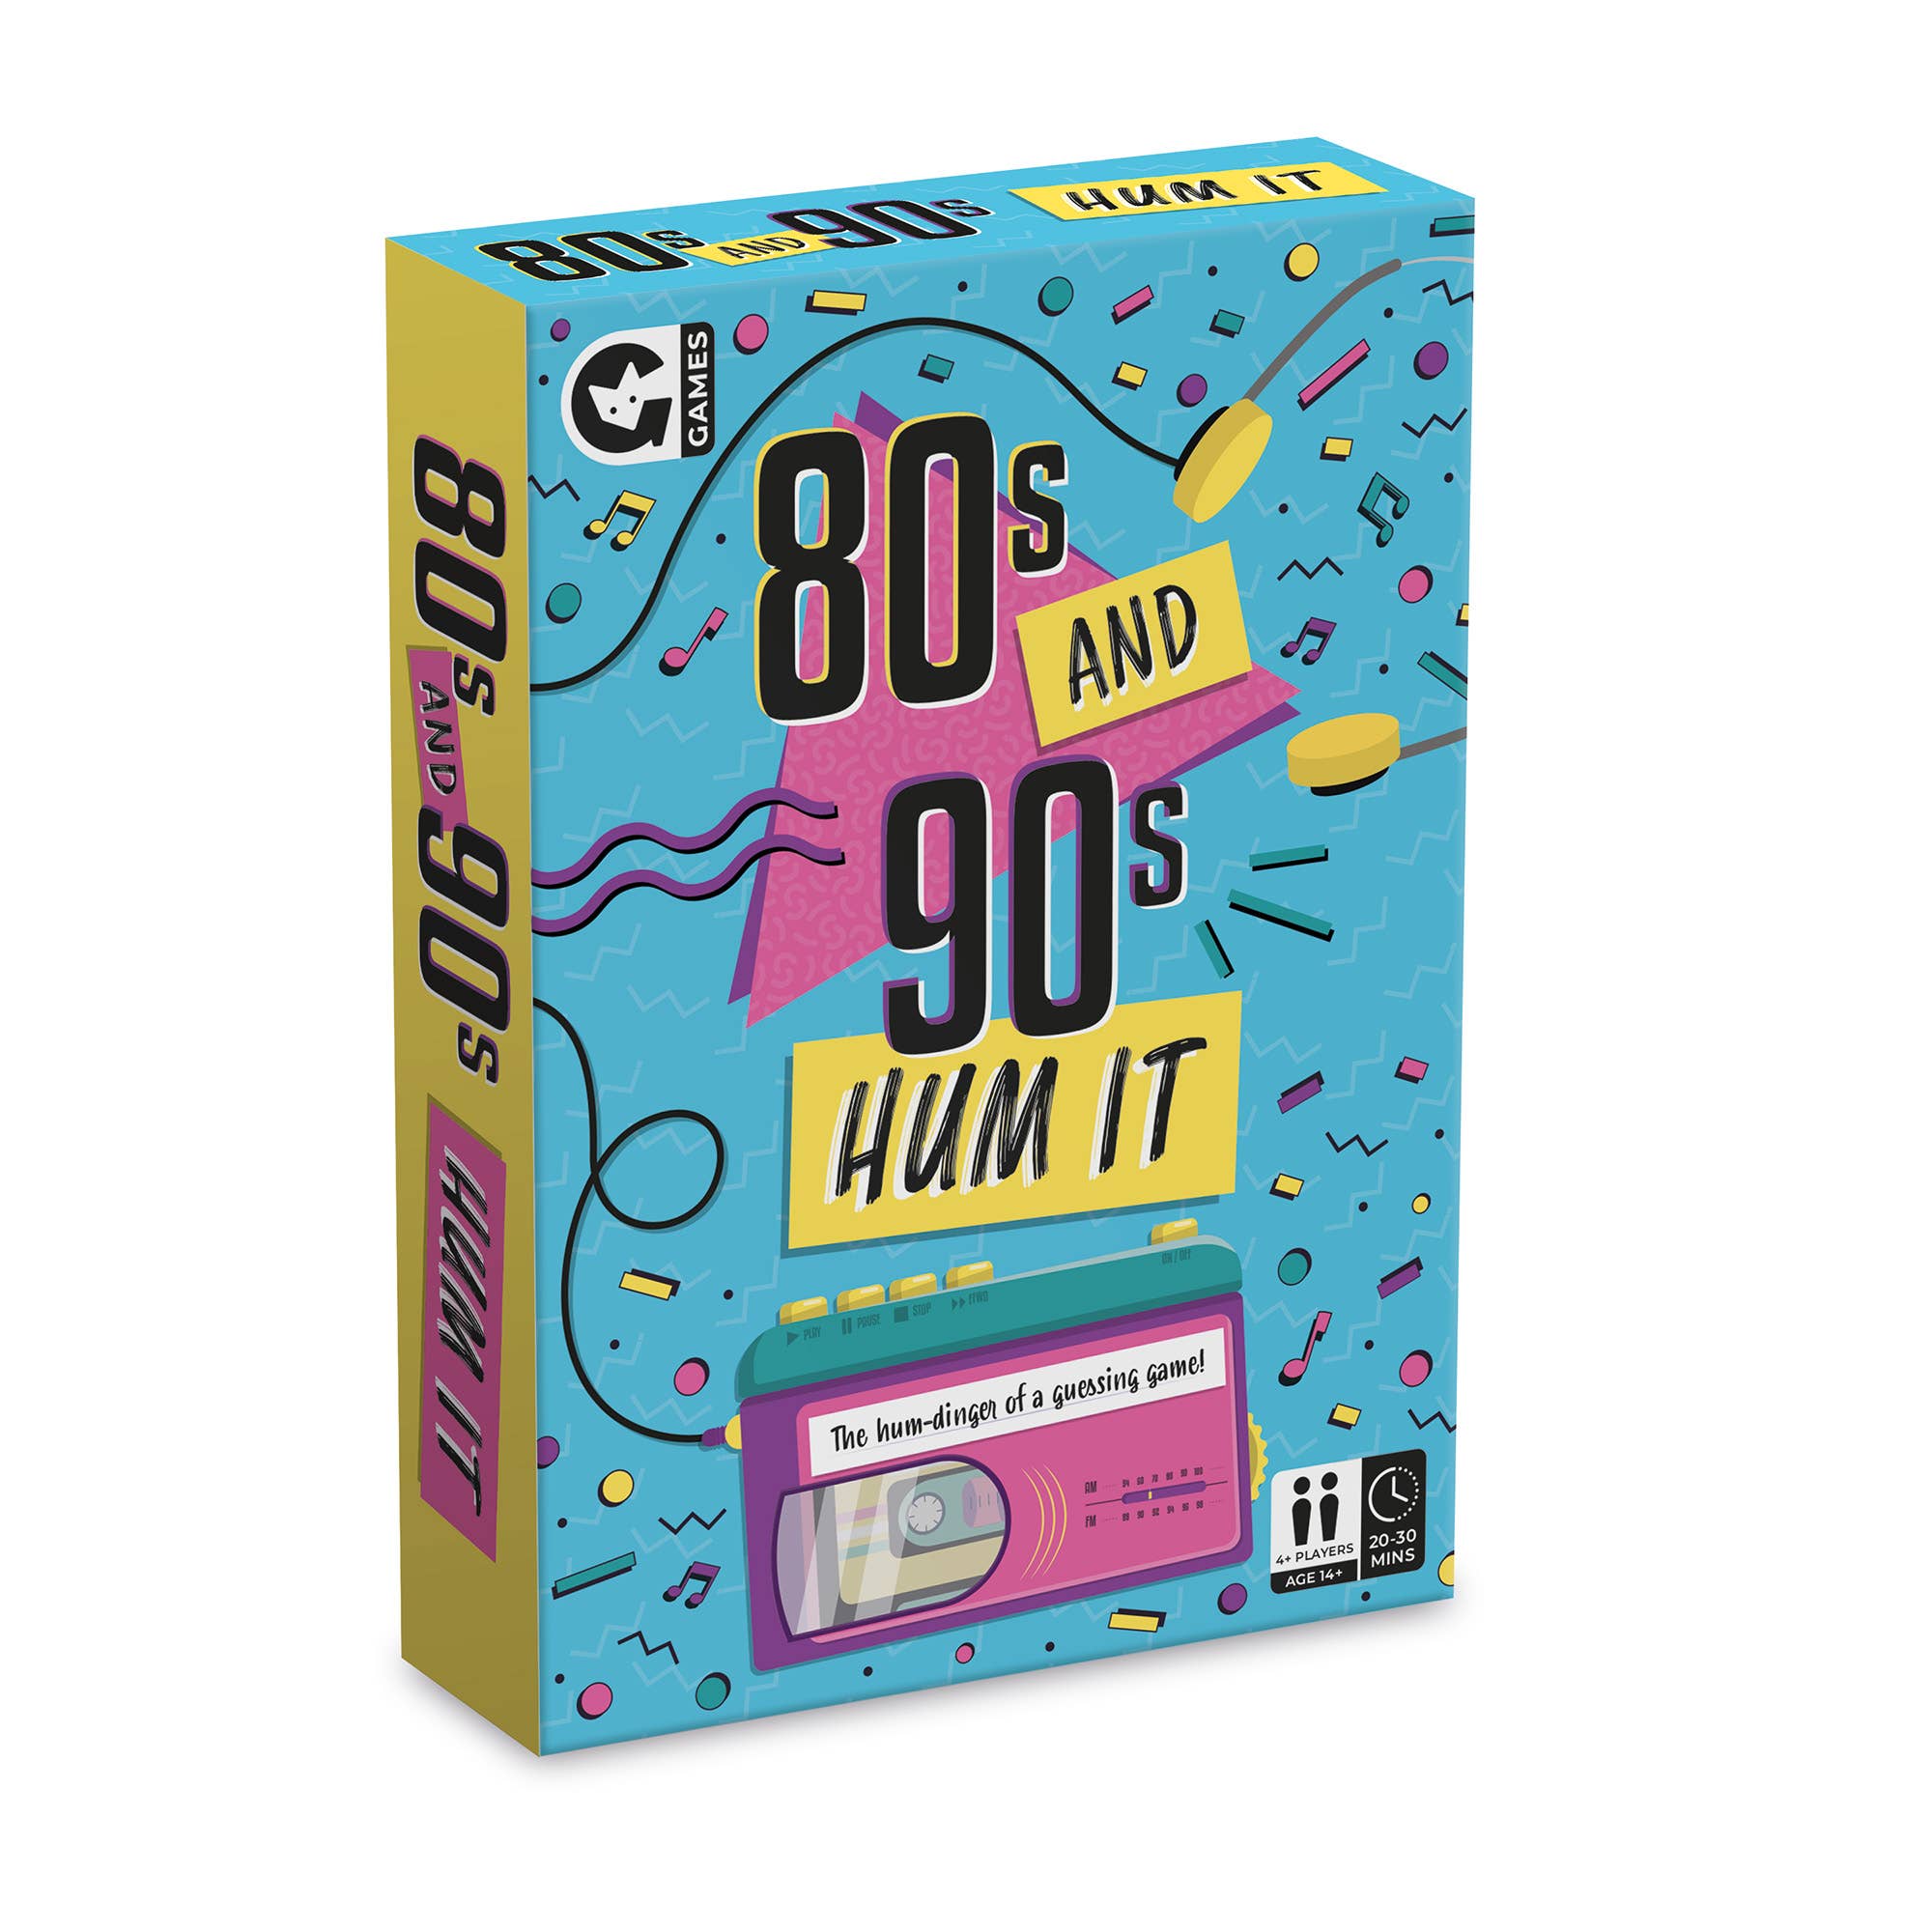 80s and 90s Hum It Game box with cards, dice, timer, and score pad. Ready for a retro music team guessing game for ages 14 and up.